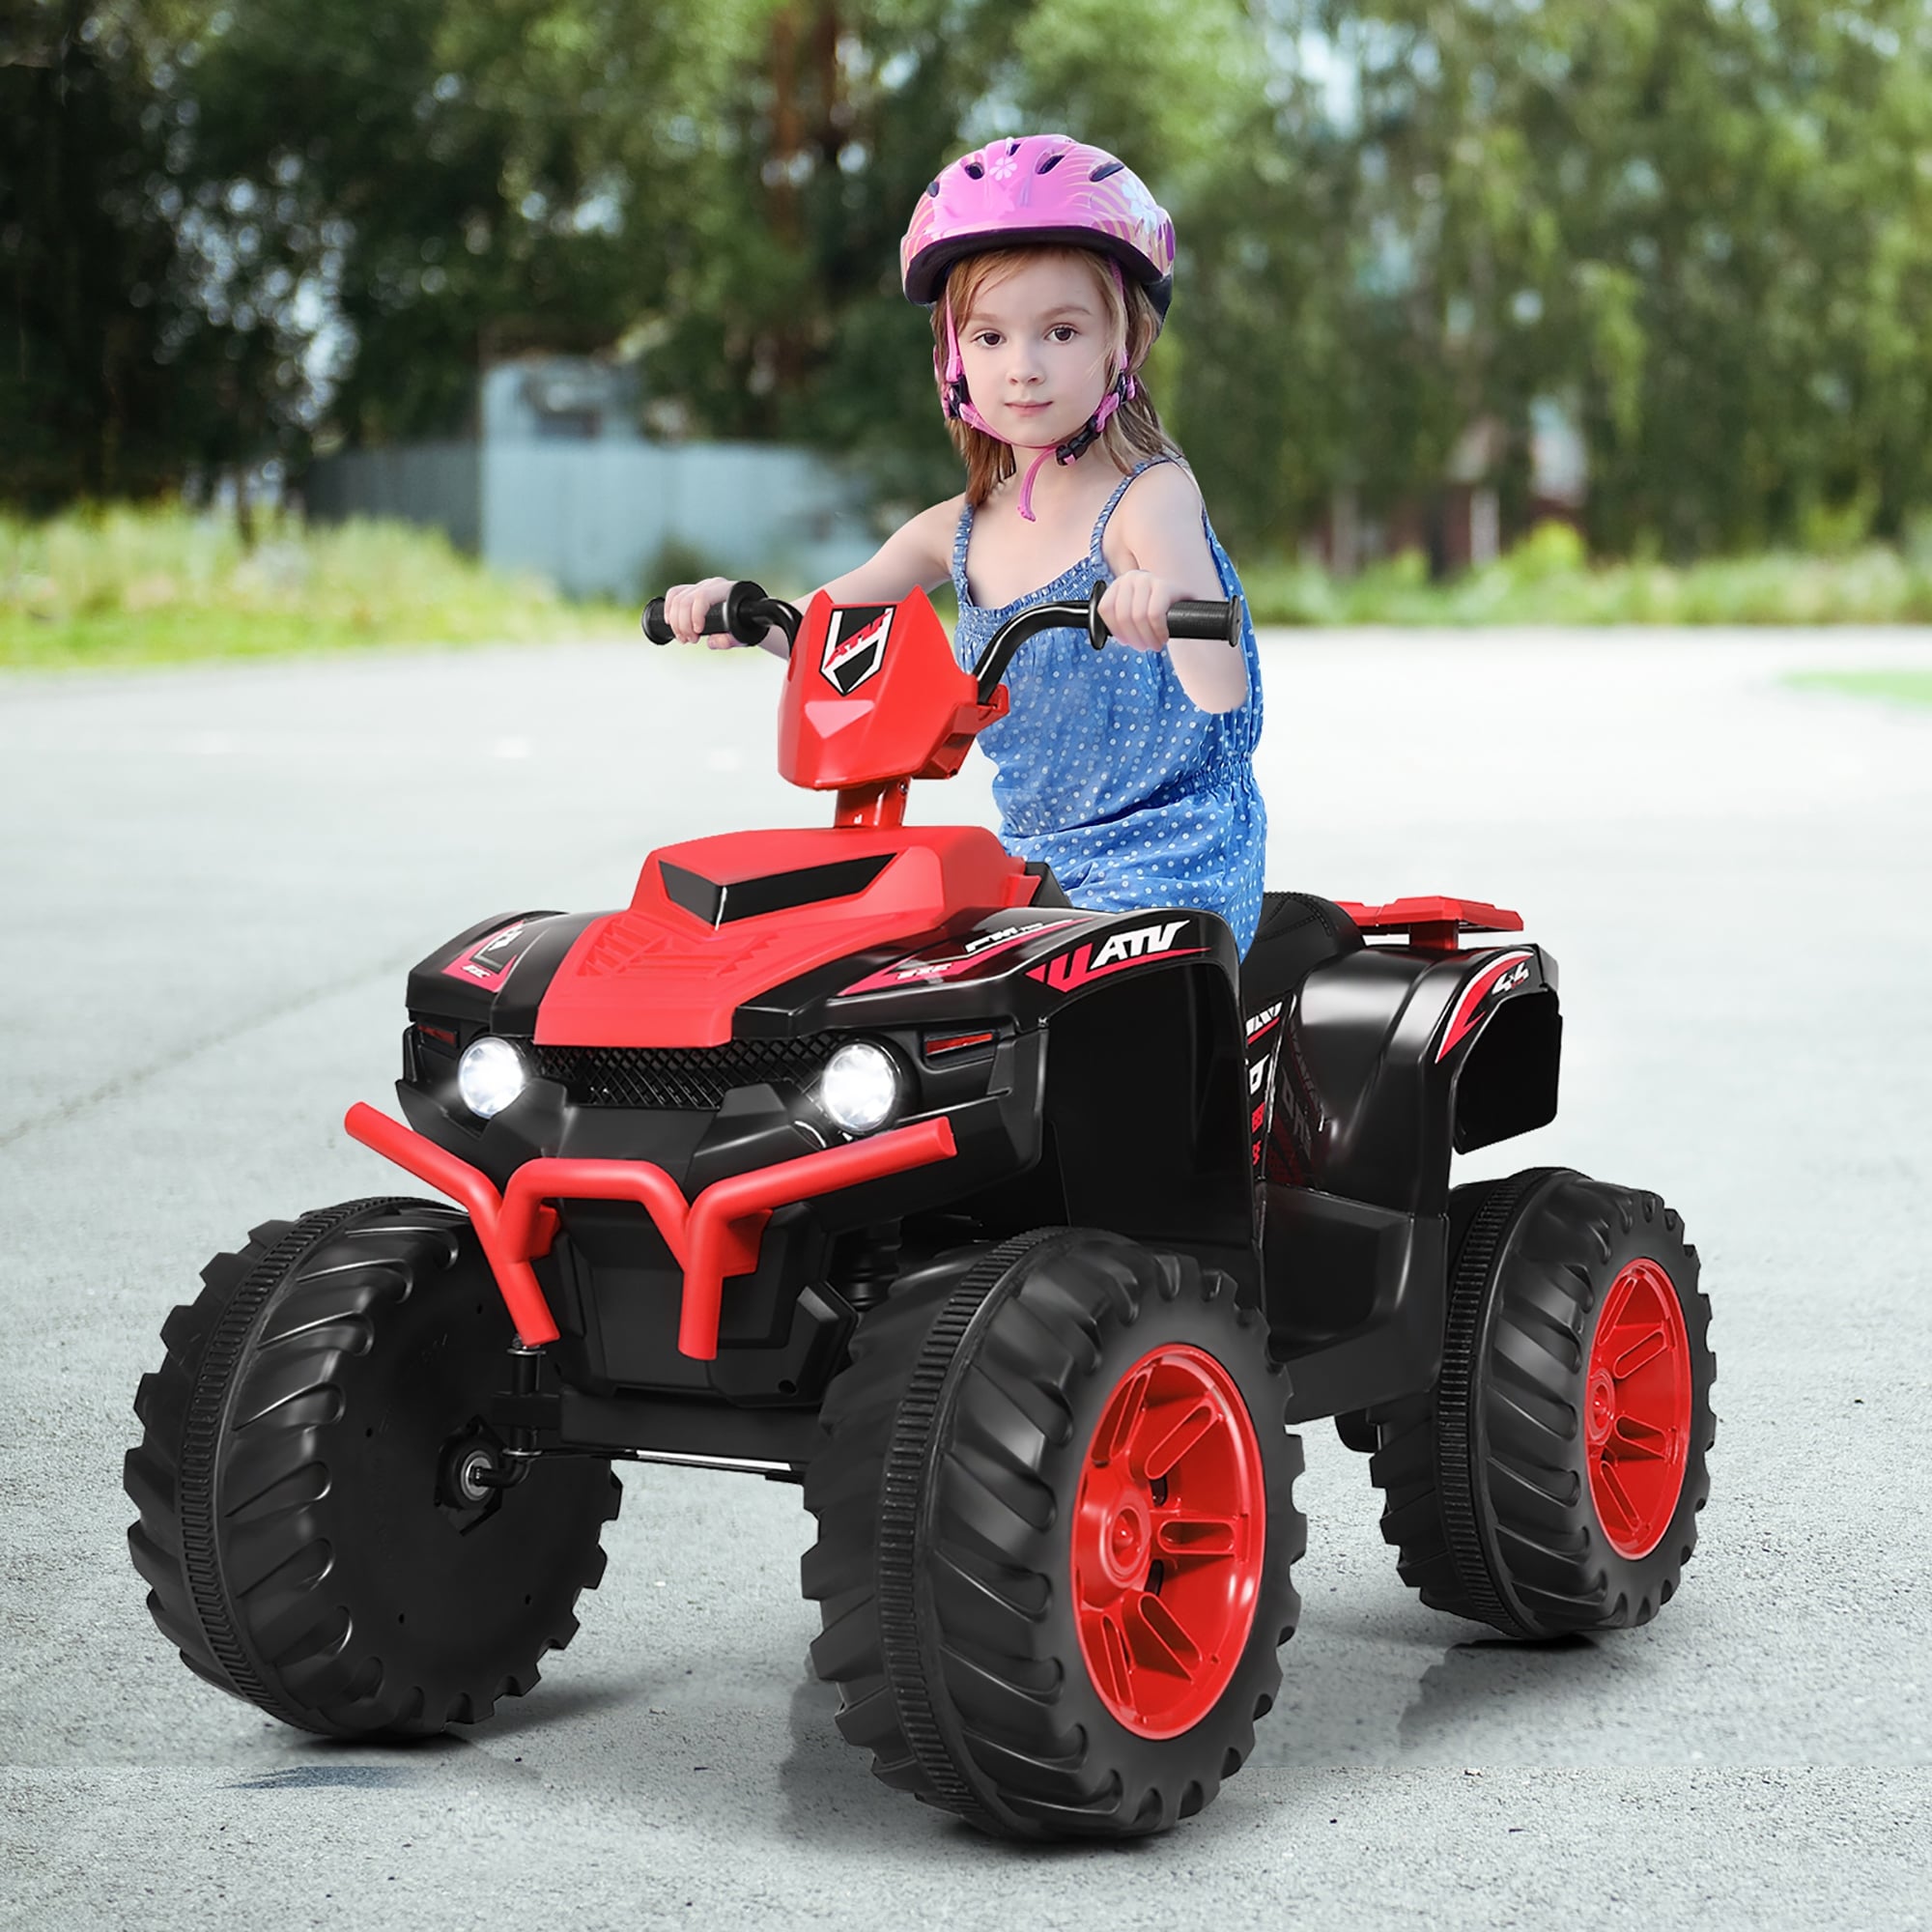 https://ak1.ostkcdn.com/images/products/is/images/direct/8070a8bd8d3f179fe049a34606f501e1bf0b9484/Costway-12V-Kids-4-Wheeler-ATV-Quad-Ride-On-Car-w--LED-Lights-Music.jpg